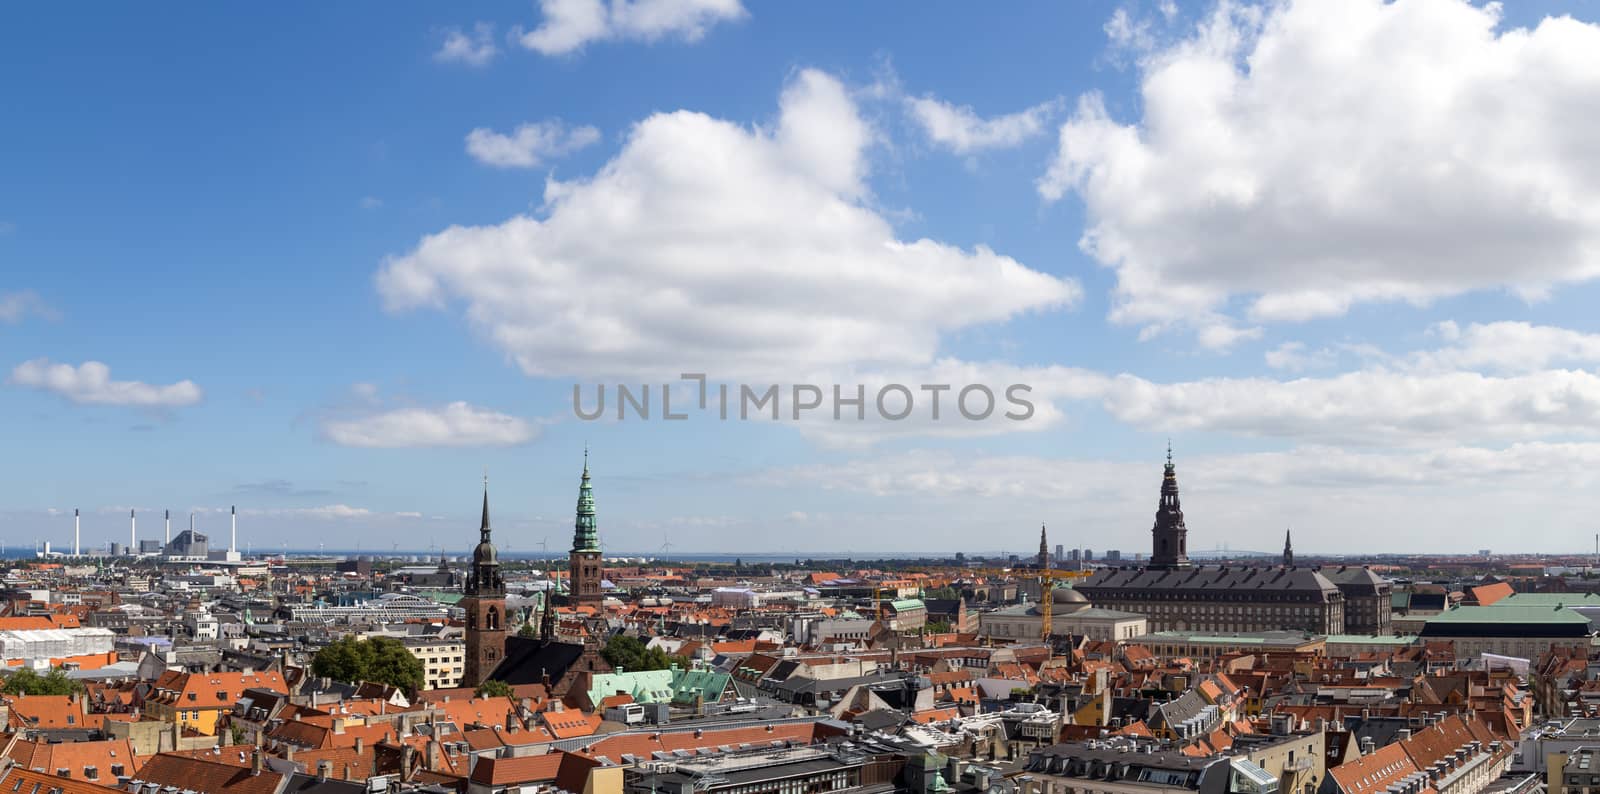 Copenhagen, Denmark - August 15, 2016: Panoramic view over the city from the bell tower of Vor Frue Cathedral